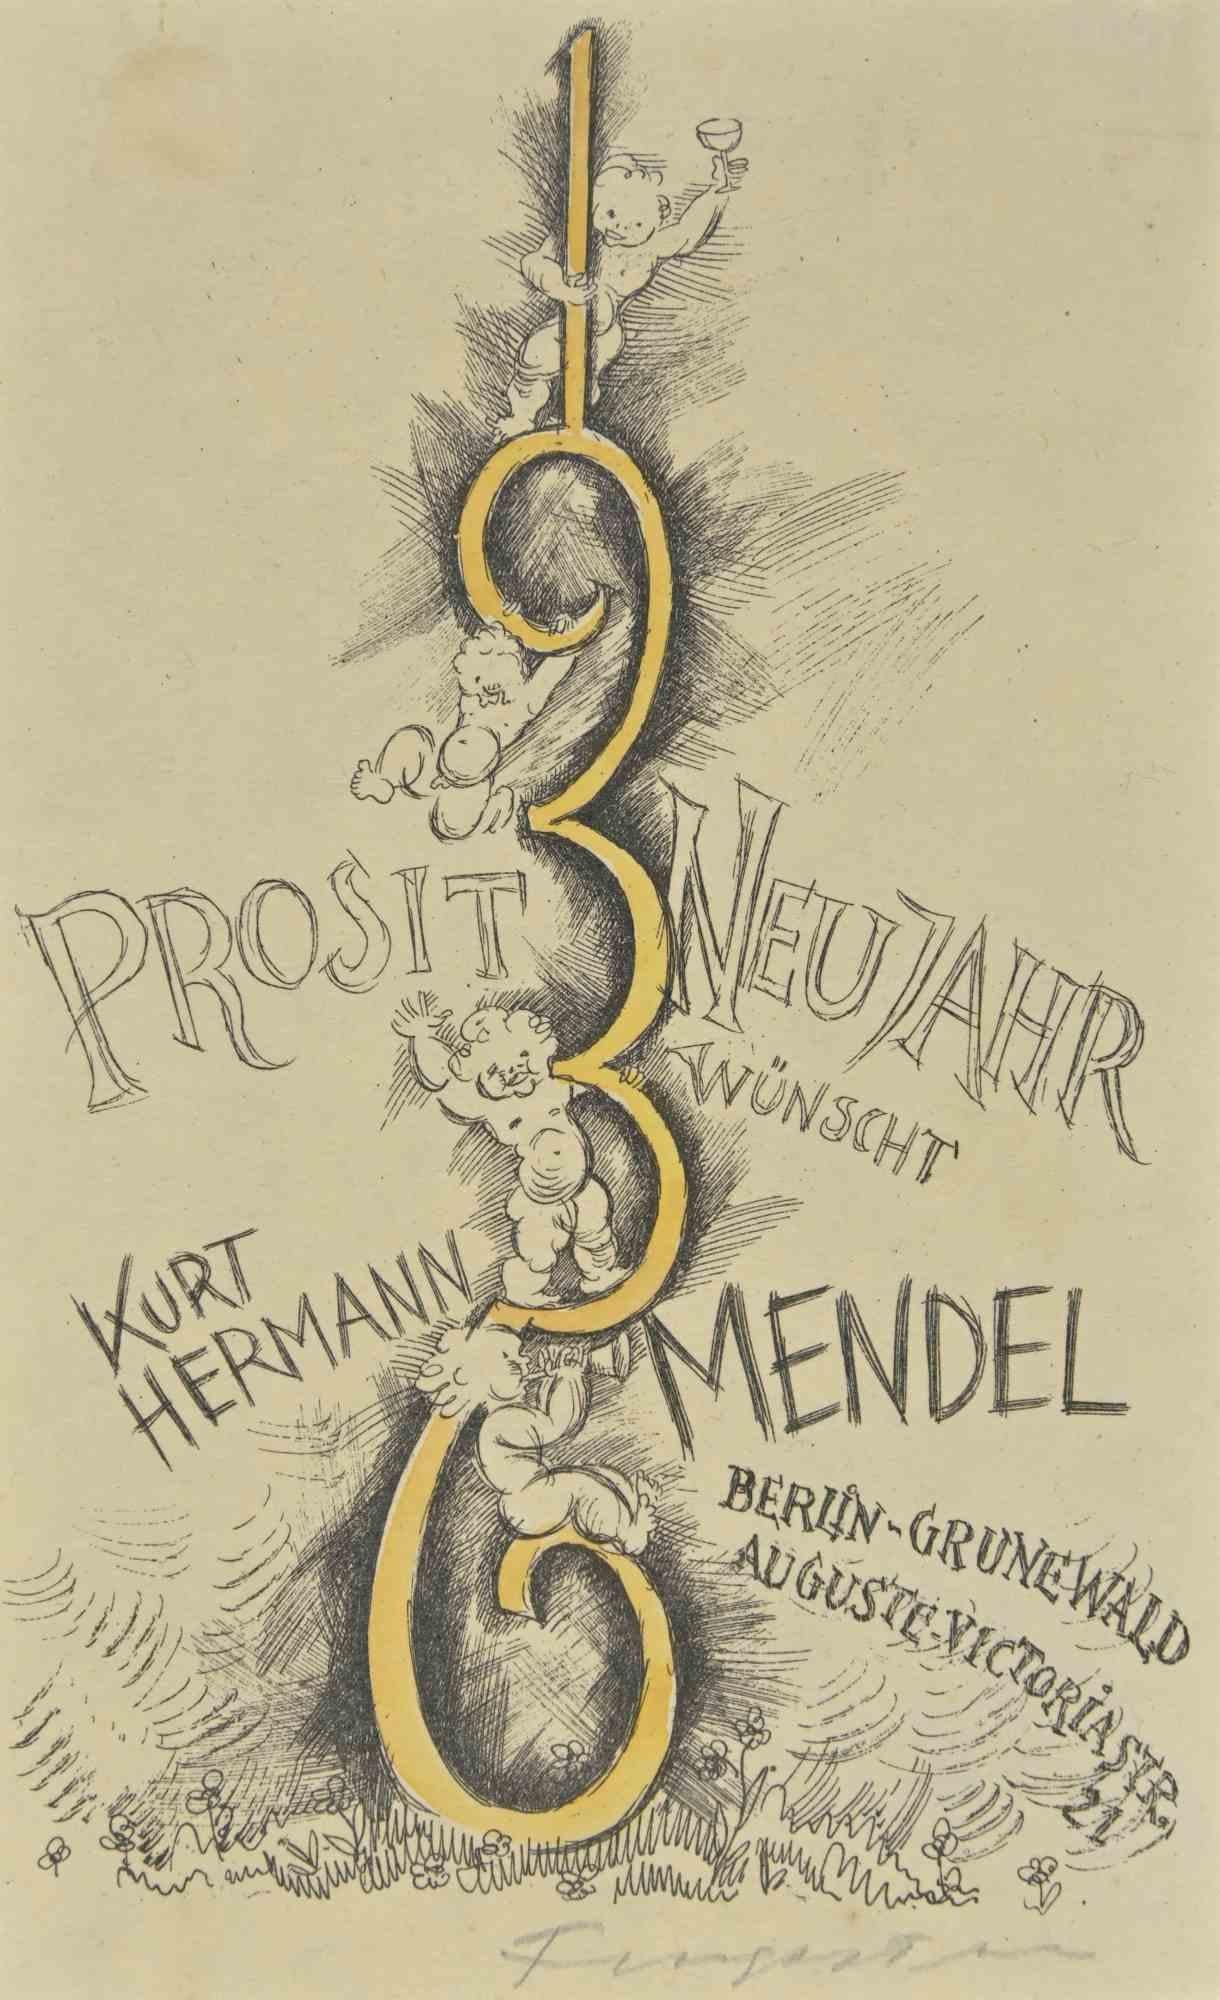 Ex Libris - Kurt Hermann Mendel  is a Woodcut print created by Michel Fingesten in 1936.

Hand signed on the lower margin.

Good conditions.

Michel Fingesten (1884 - 1943) was a Czech painter and engraver of Jewish origin. He is considered one of